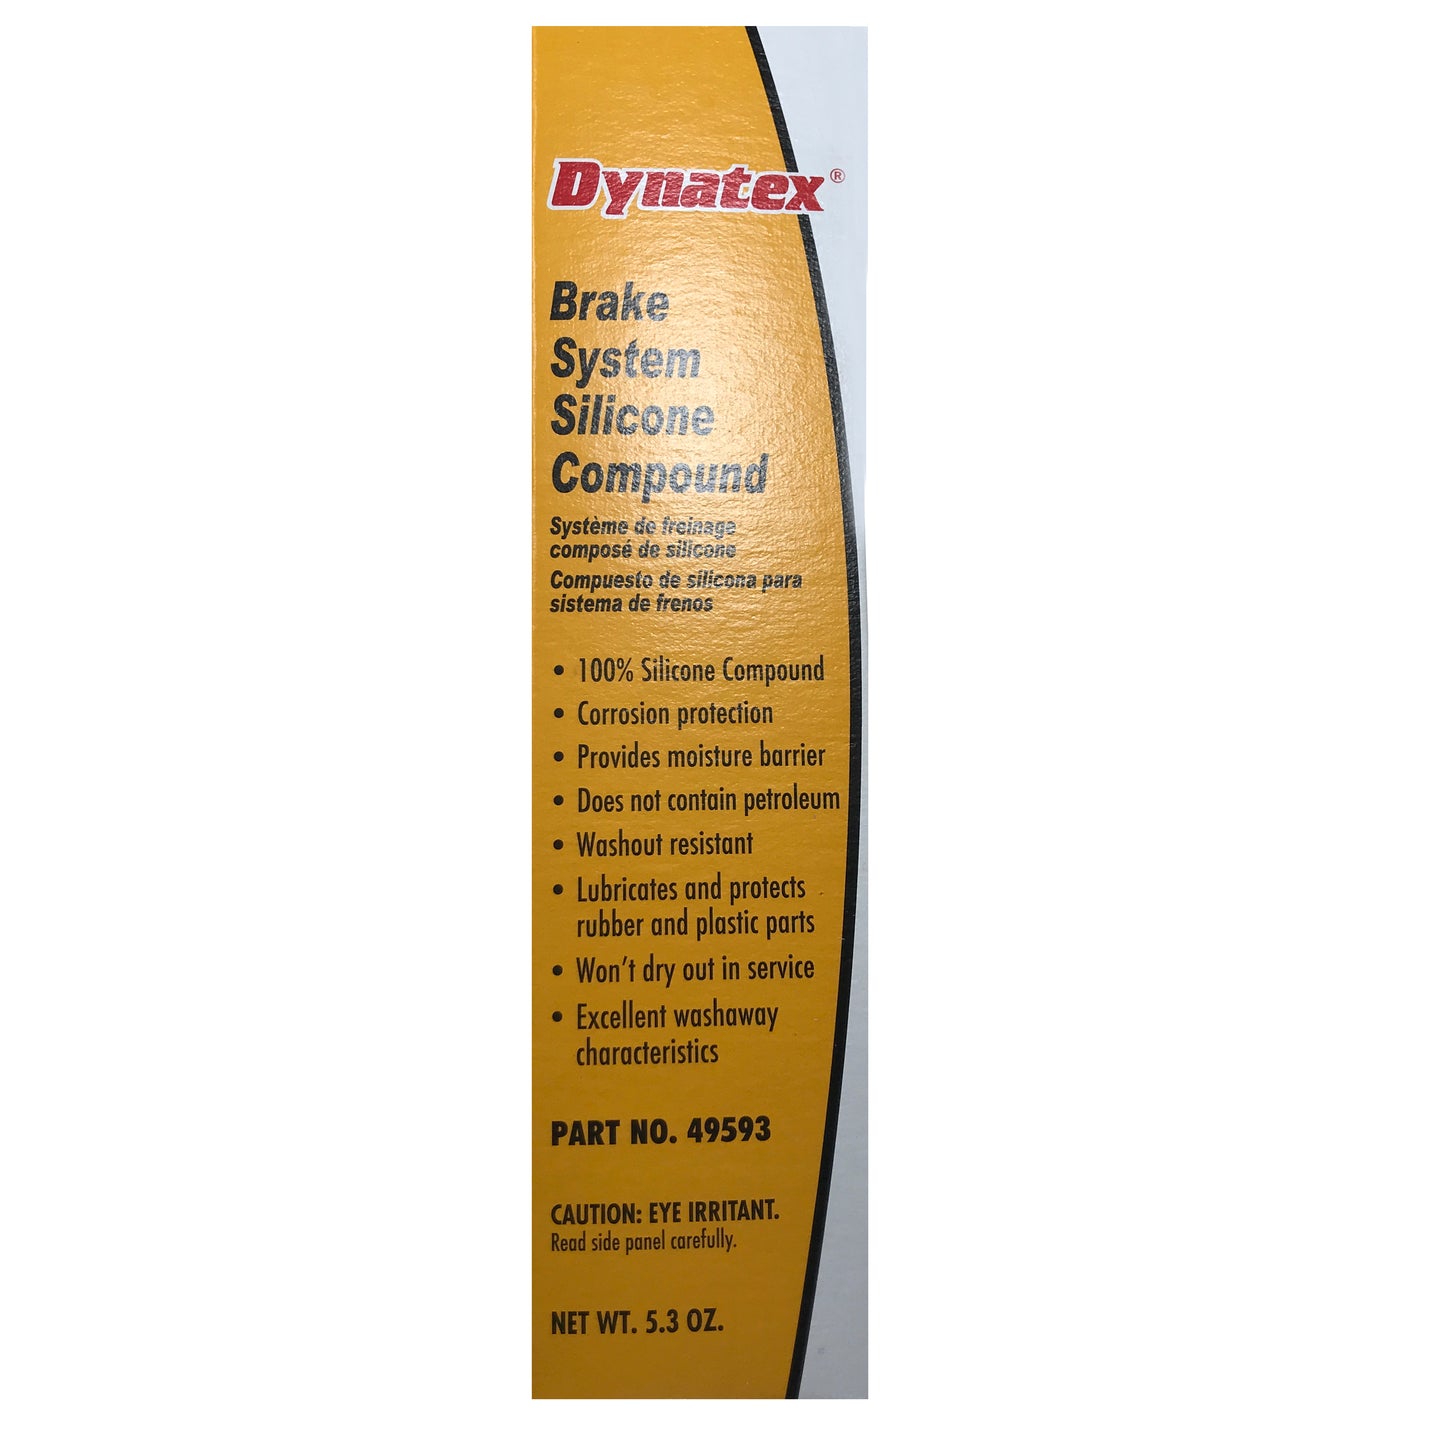 Dynatex Brake System Silicone Lubricant Compound 5.3 Oz. Tube - Boxed, pack of 6 Tubes